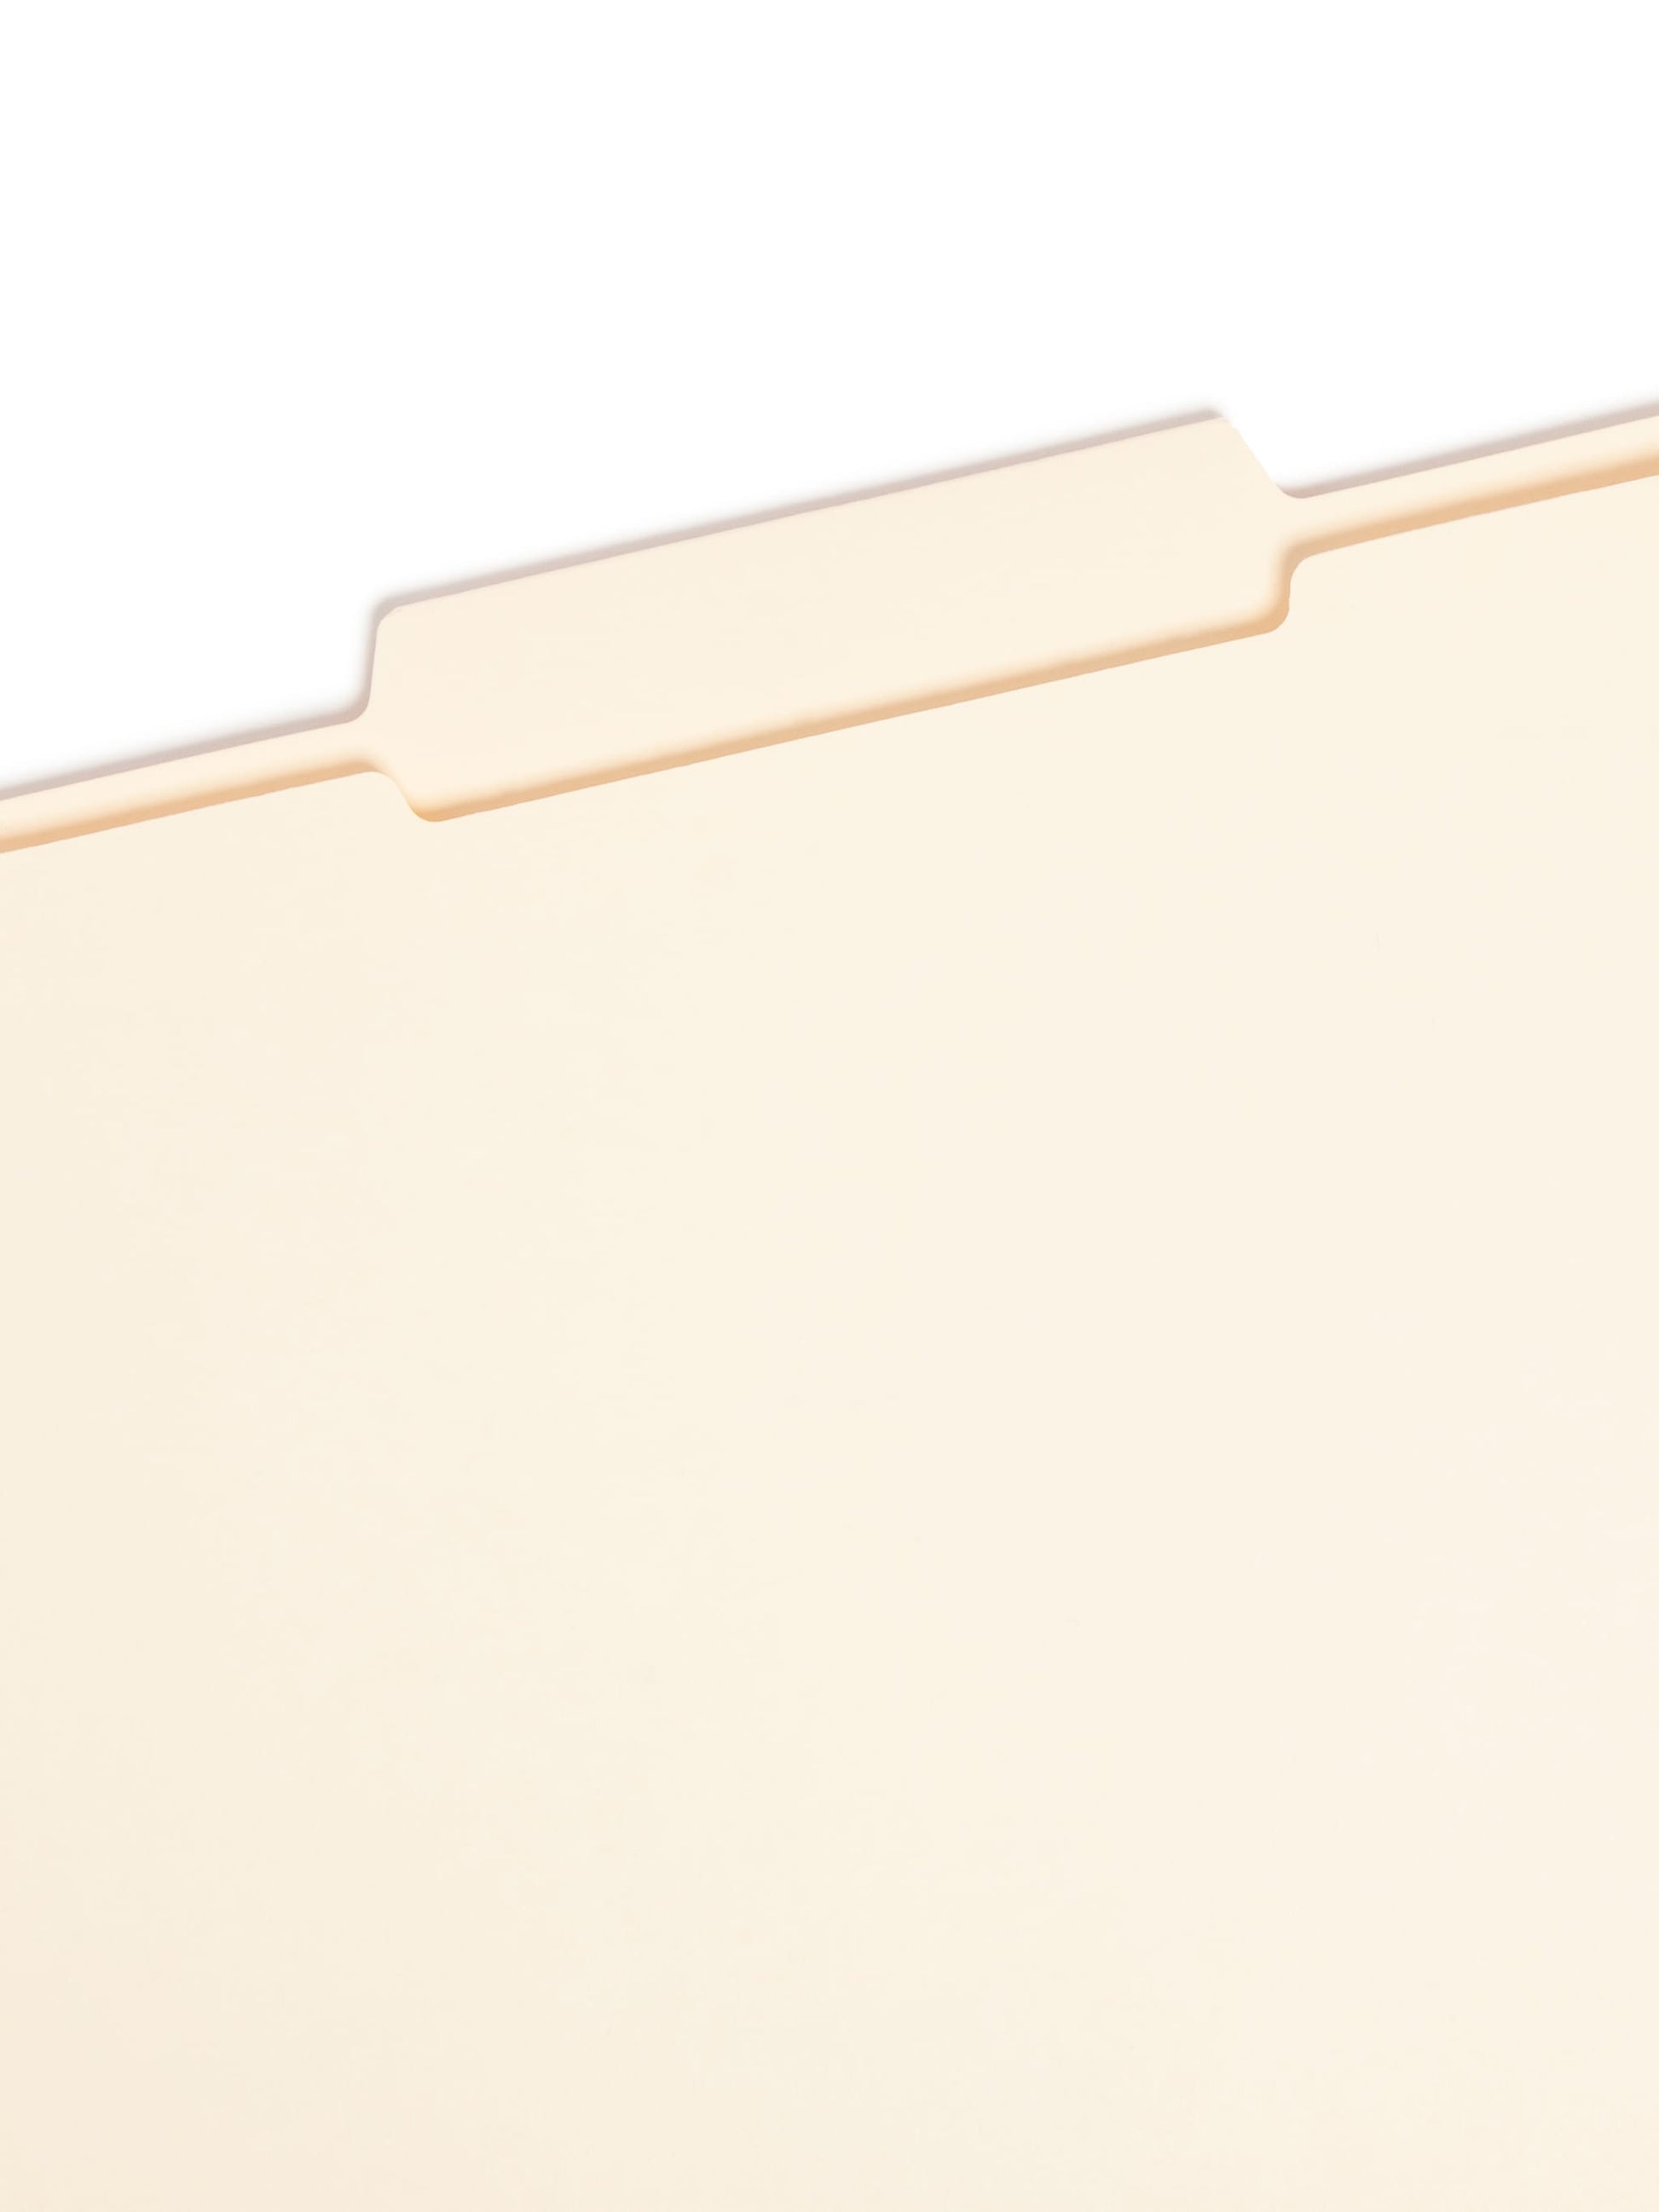 Reinforced Tab File Folders, 2/5-Cut Right of Center Tab, Manila Color, Letter Size, Set of 100, 086486103763